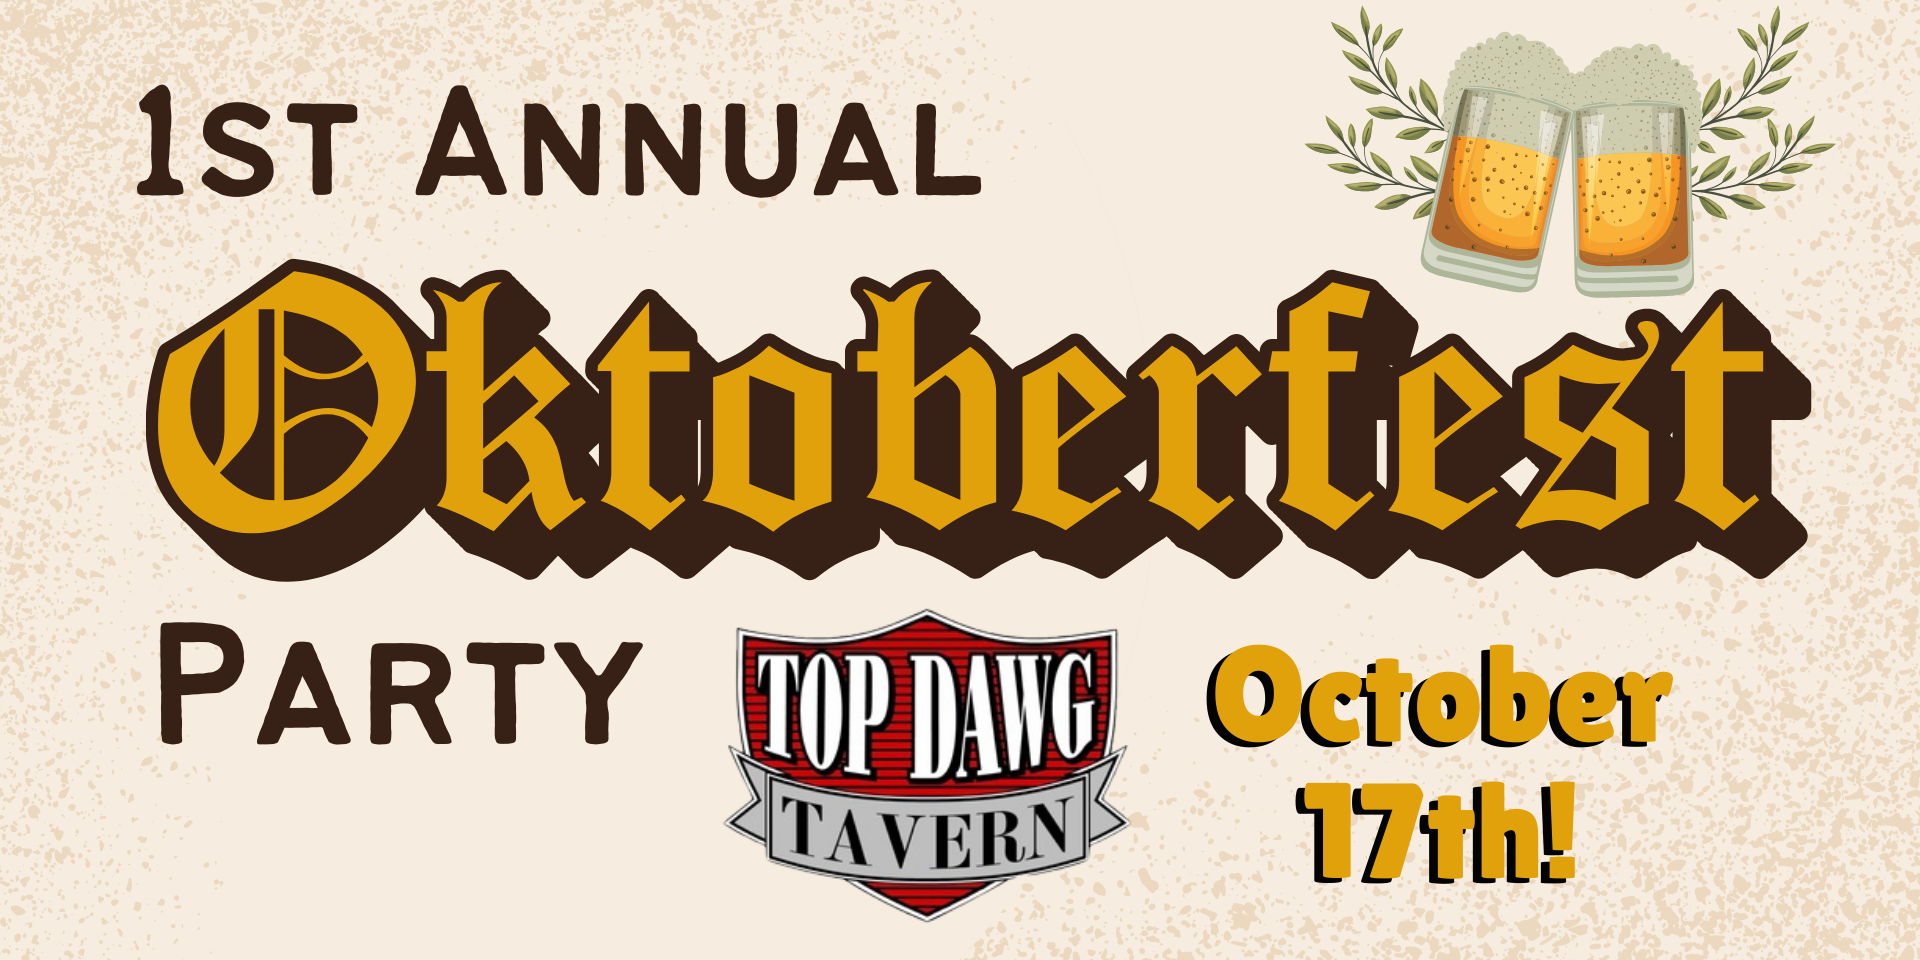 1st Annual Oktoberfest at Top Dawg Tavern promotional image